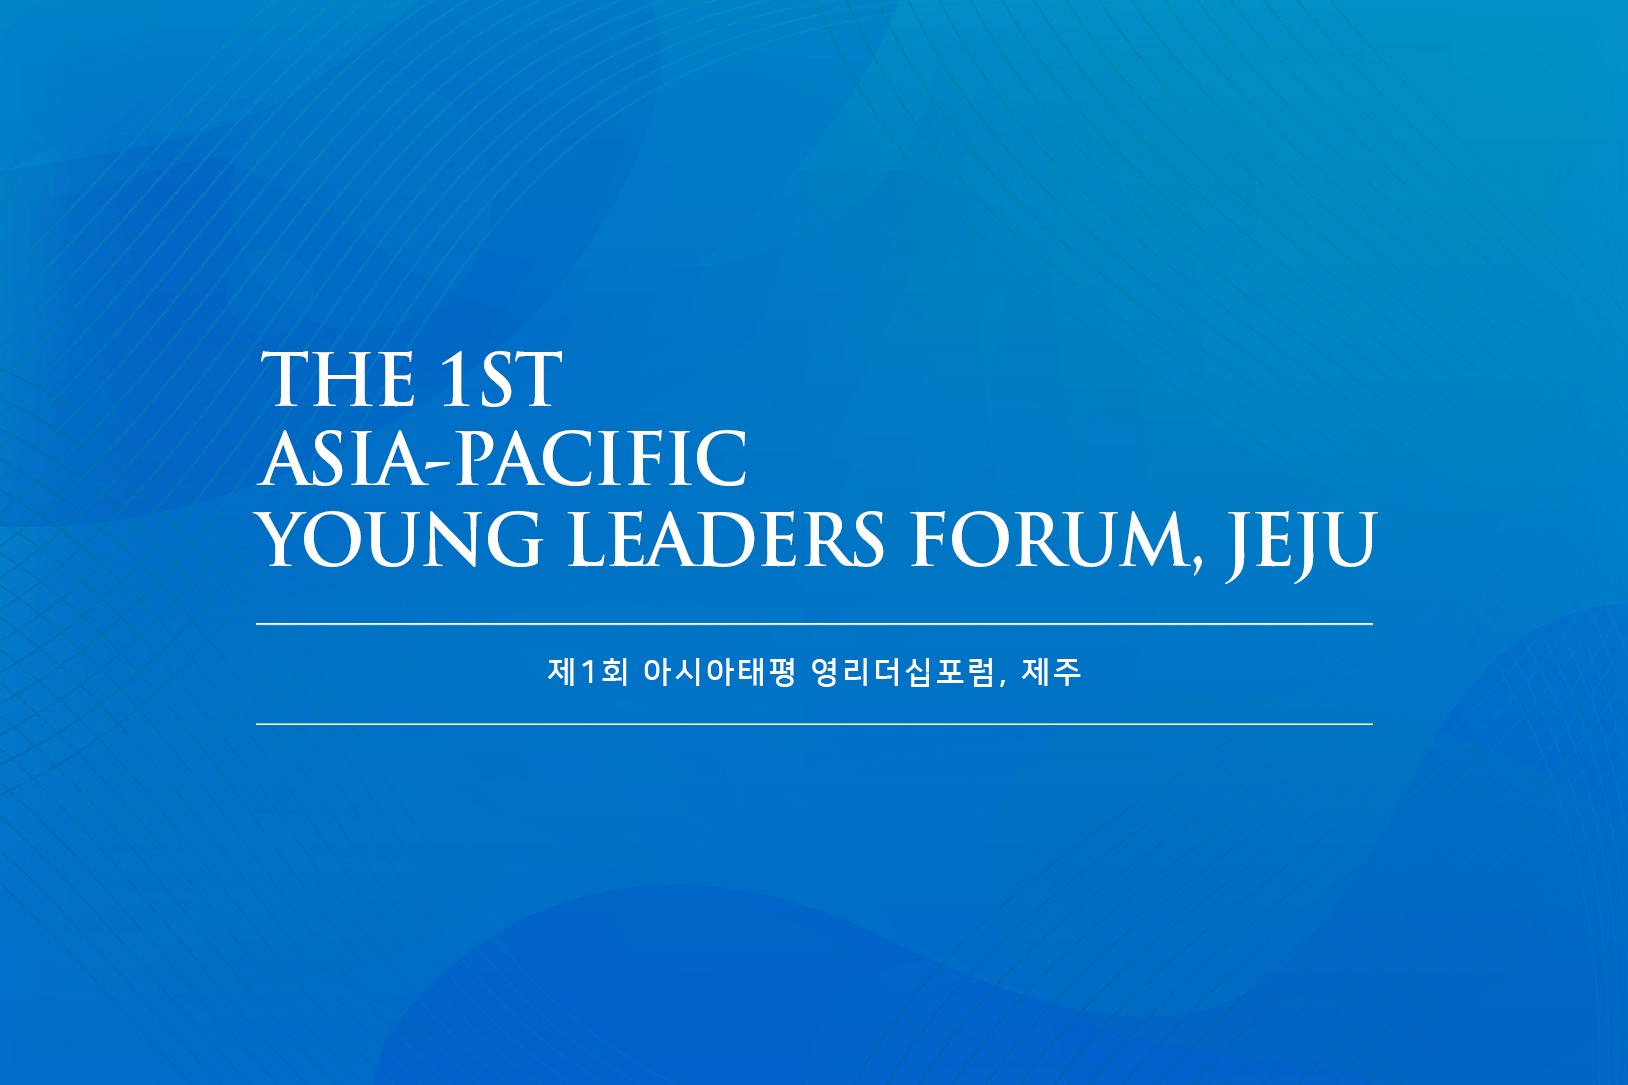 APLN at the Asia-Pacific Young Leaders Forum